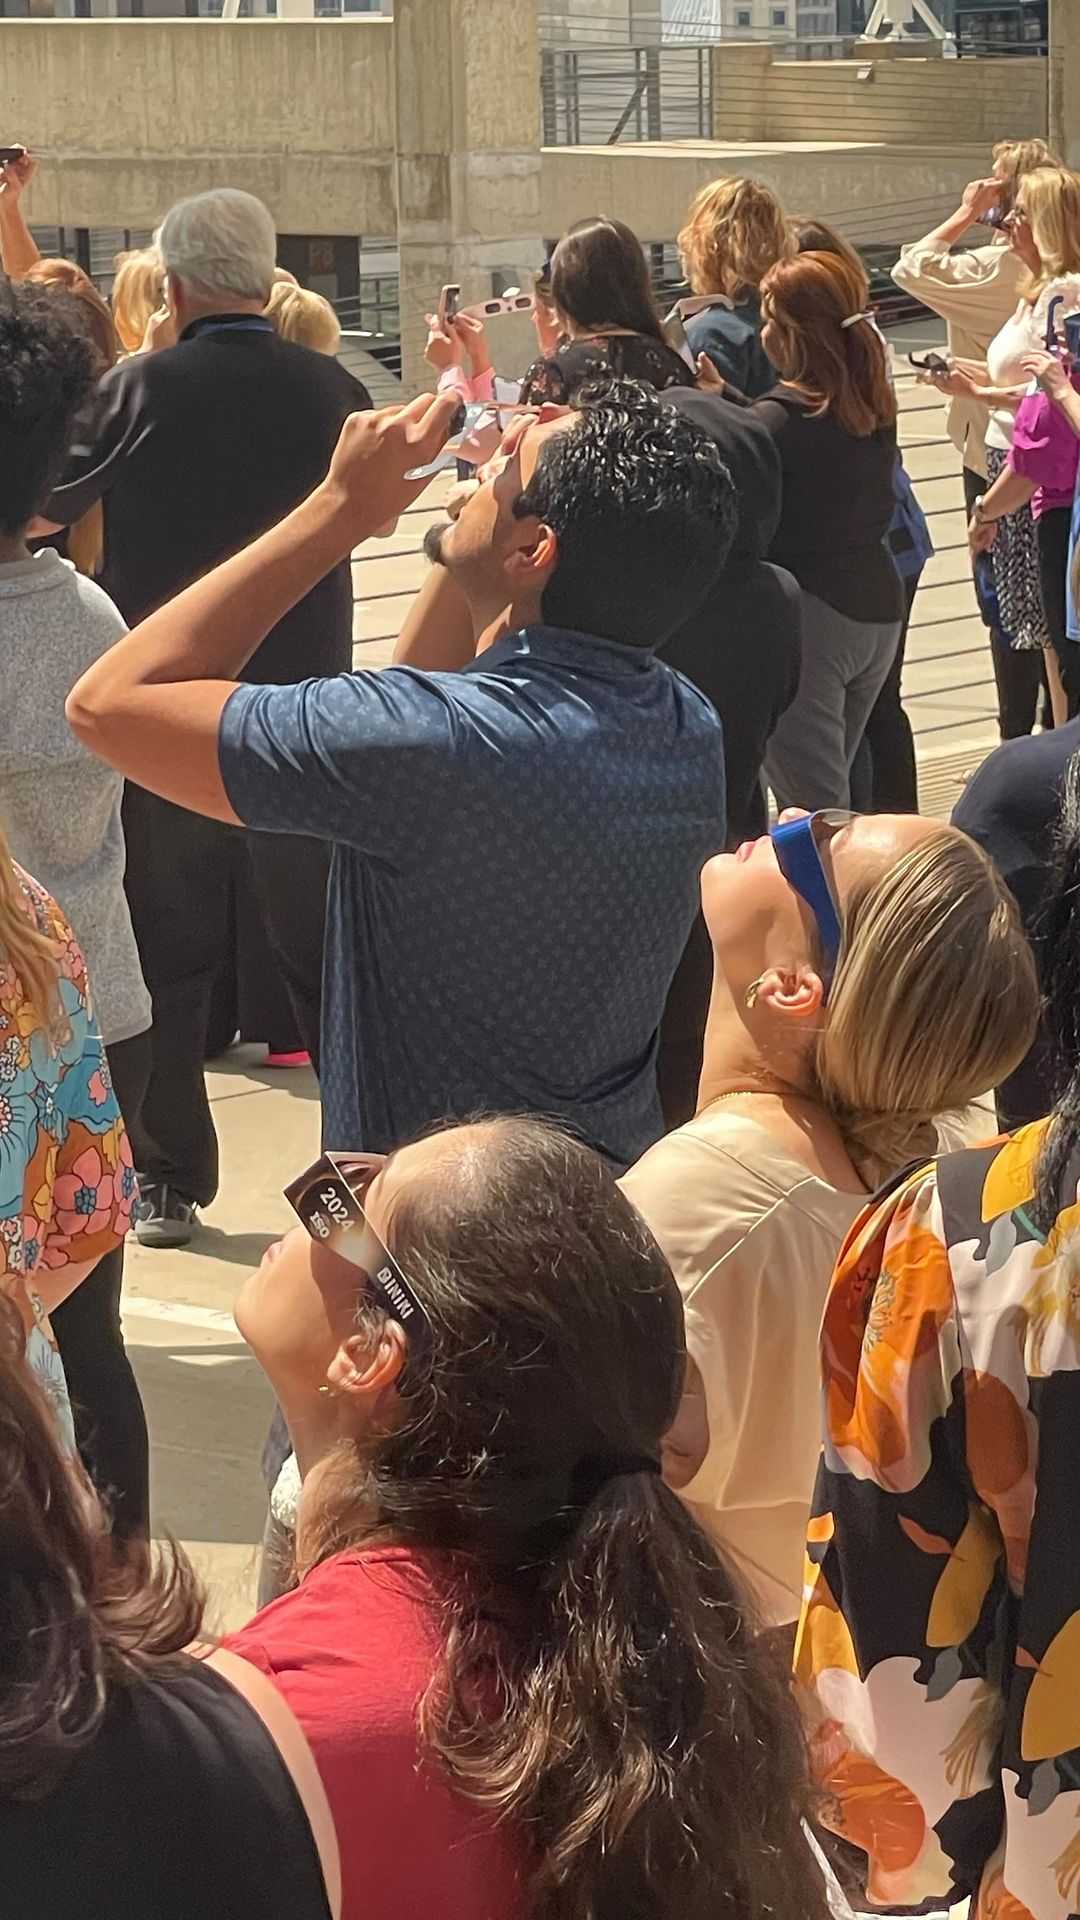 Today’s eclipse was simply breathtaking! 🌒 Our rooftop event at McKinney & Olive drew a fantastic crowd, all mesmerized by the celestial spectacle. Our customers soaked in the stunning view while indulging in eclipse-themed treats and capturing unforgettable photo moments. What a day to remember! #SolarEclipse2024 #McKinneyAndOlive